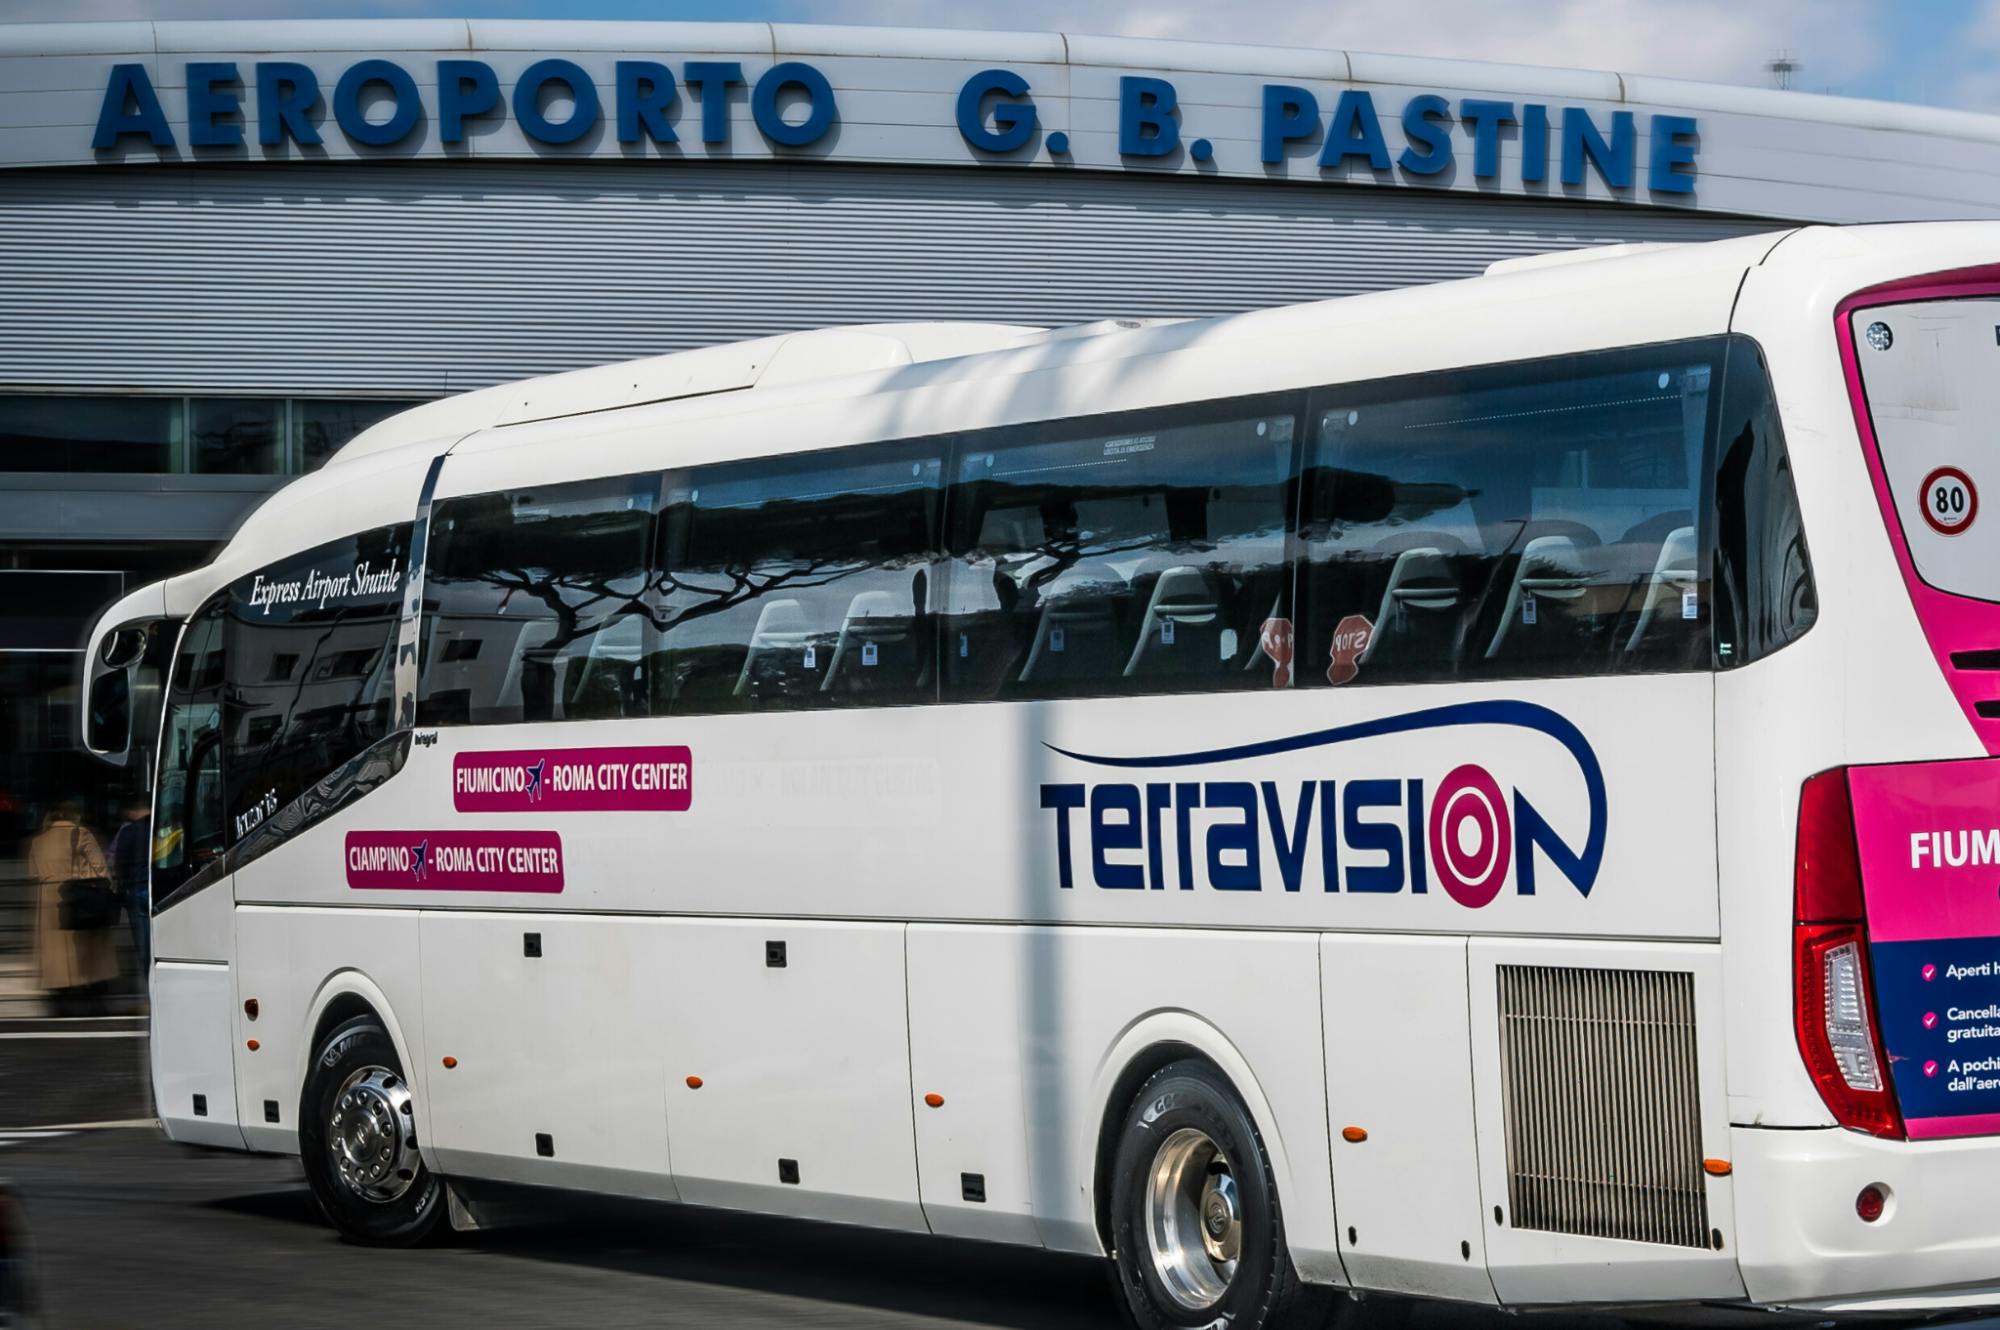 Bus transfer between Ciampino airport and Rome city center